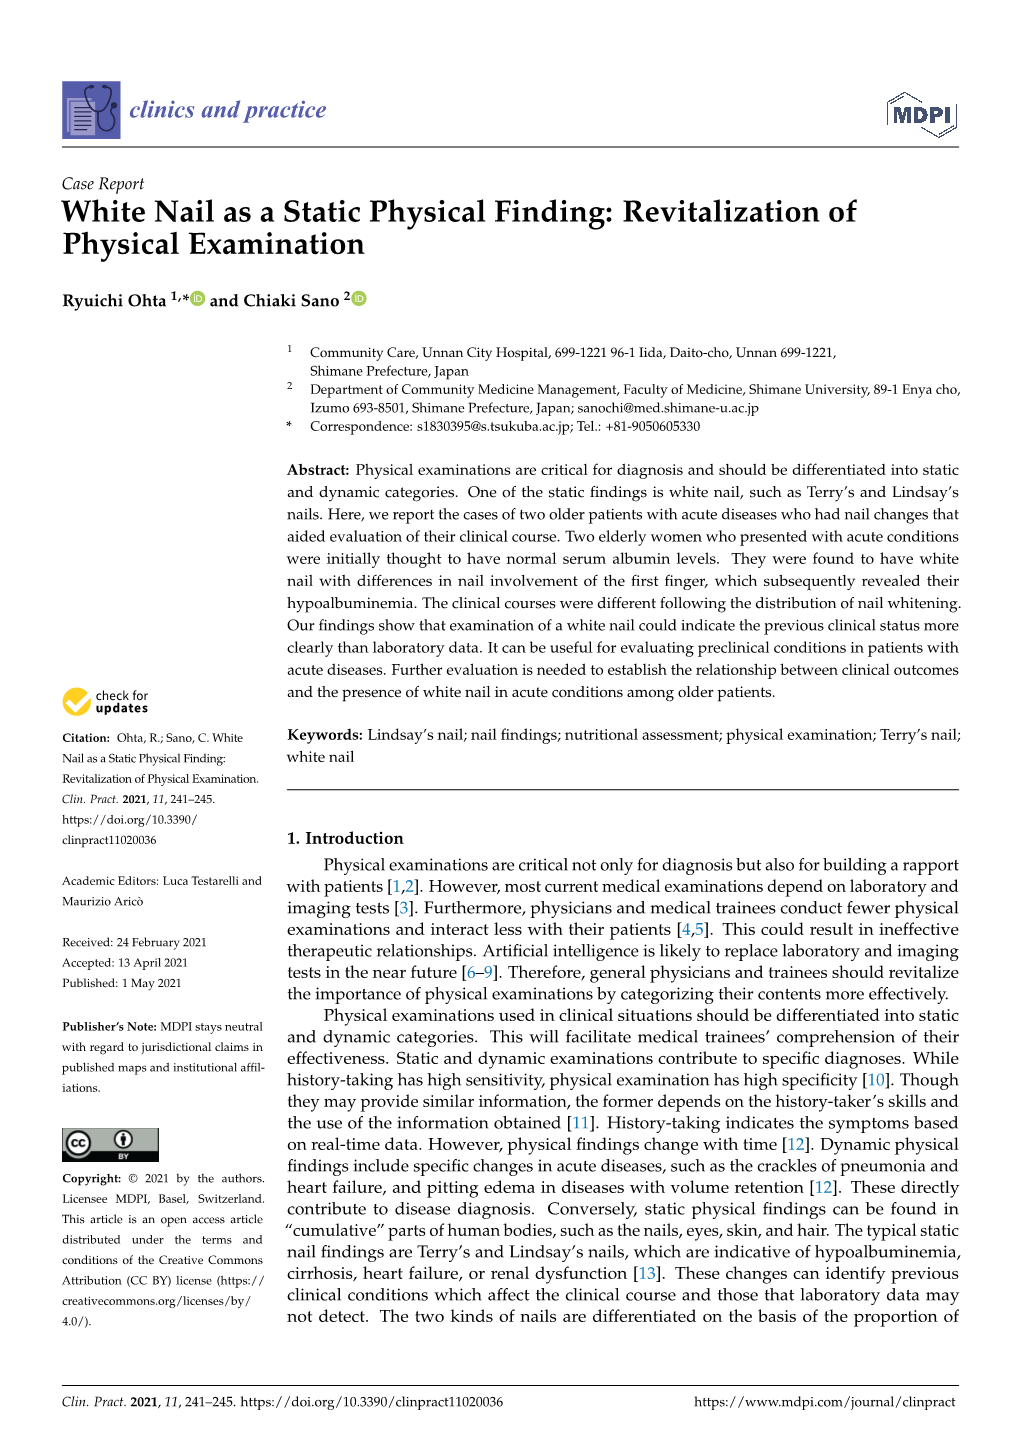 White Nail As a Static Physical Finding: Revitalization of Physical Examination